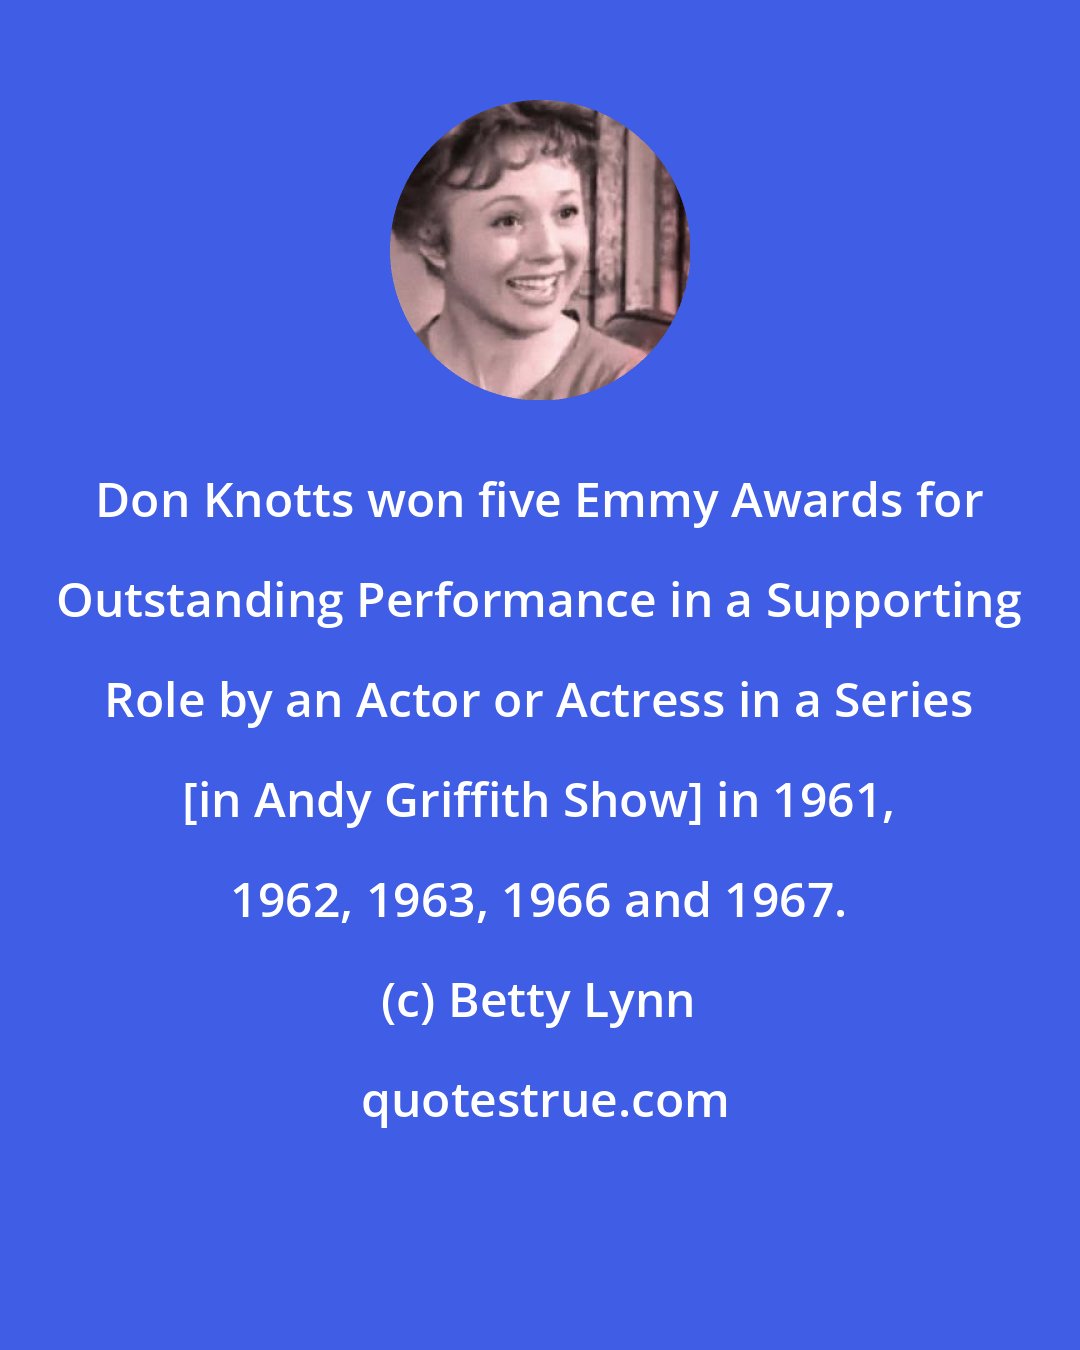 Betty Lynn: Don Knotts won five Emmy Awards for Outstanding Performance in a Supporting Role by an Actor or Actress in a Series [in Andy Griffith Show] in 1961, 1962, 1963, 1966 and 1967.